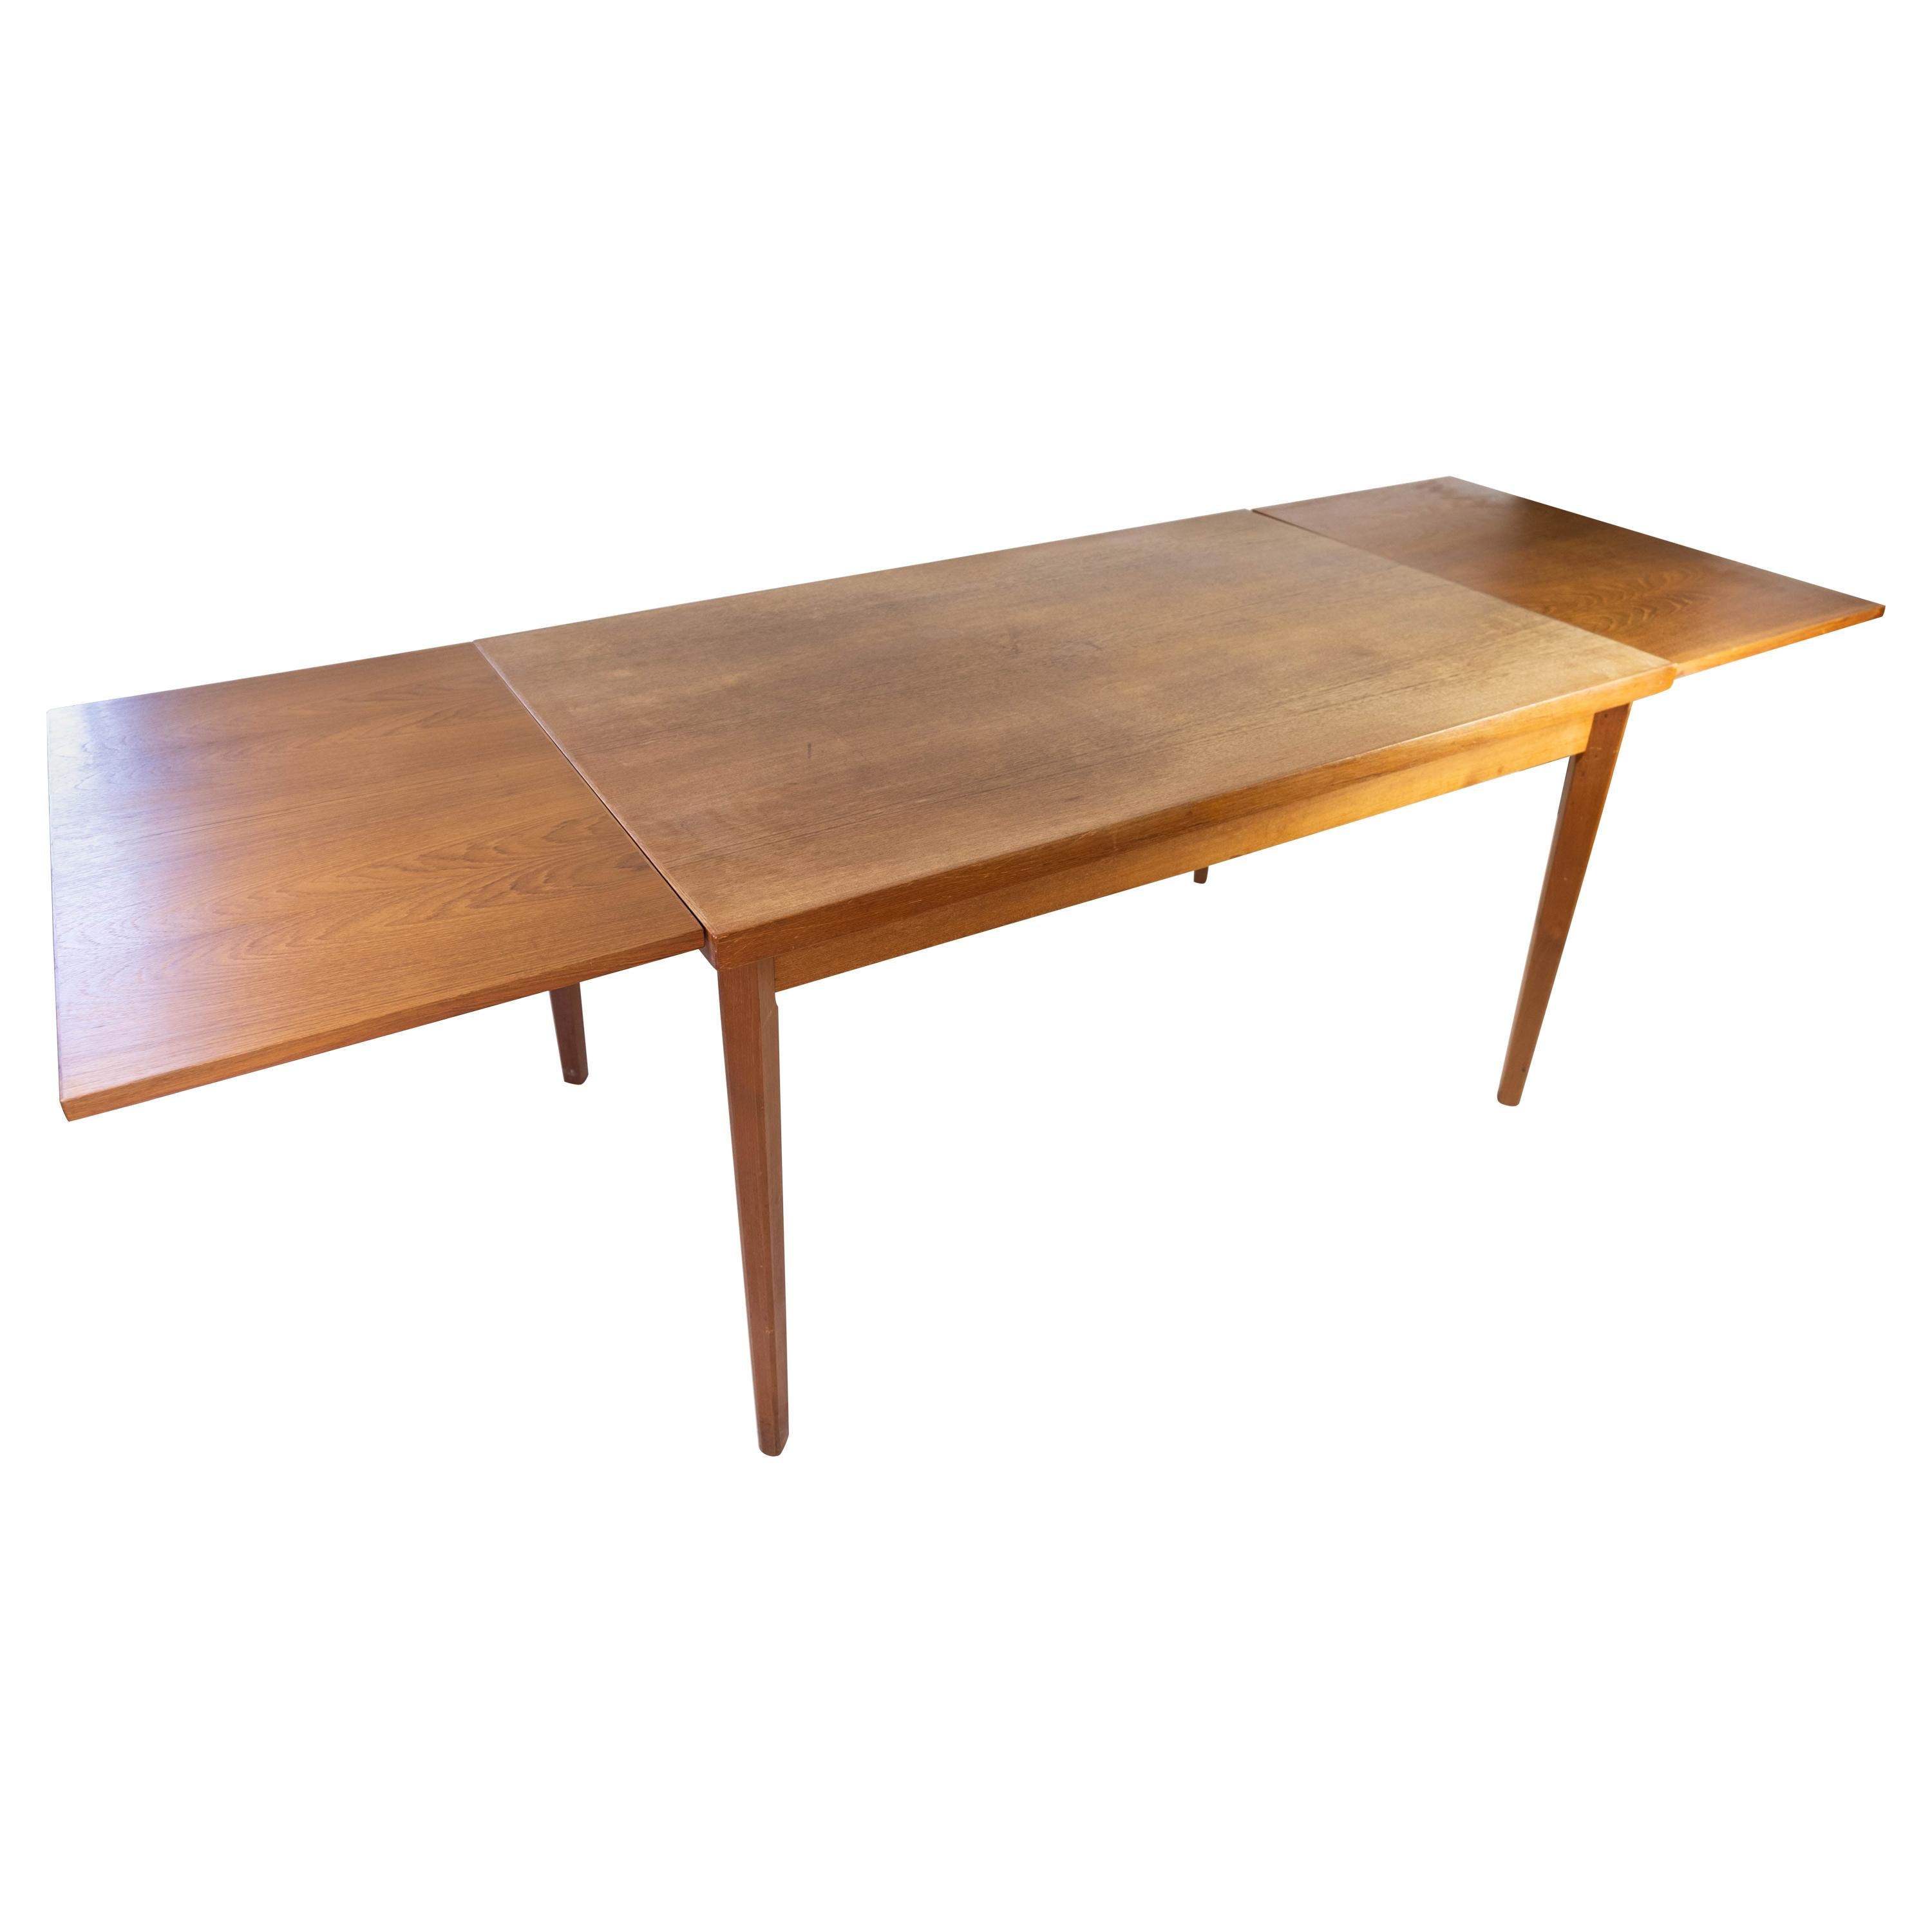 Dining Table with Extensions in Teak of Danish Design from the 1960s For Sale